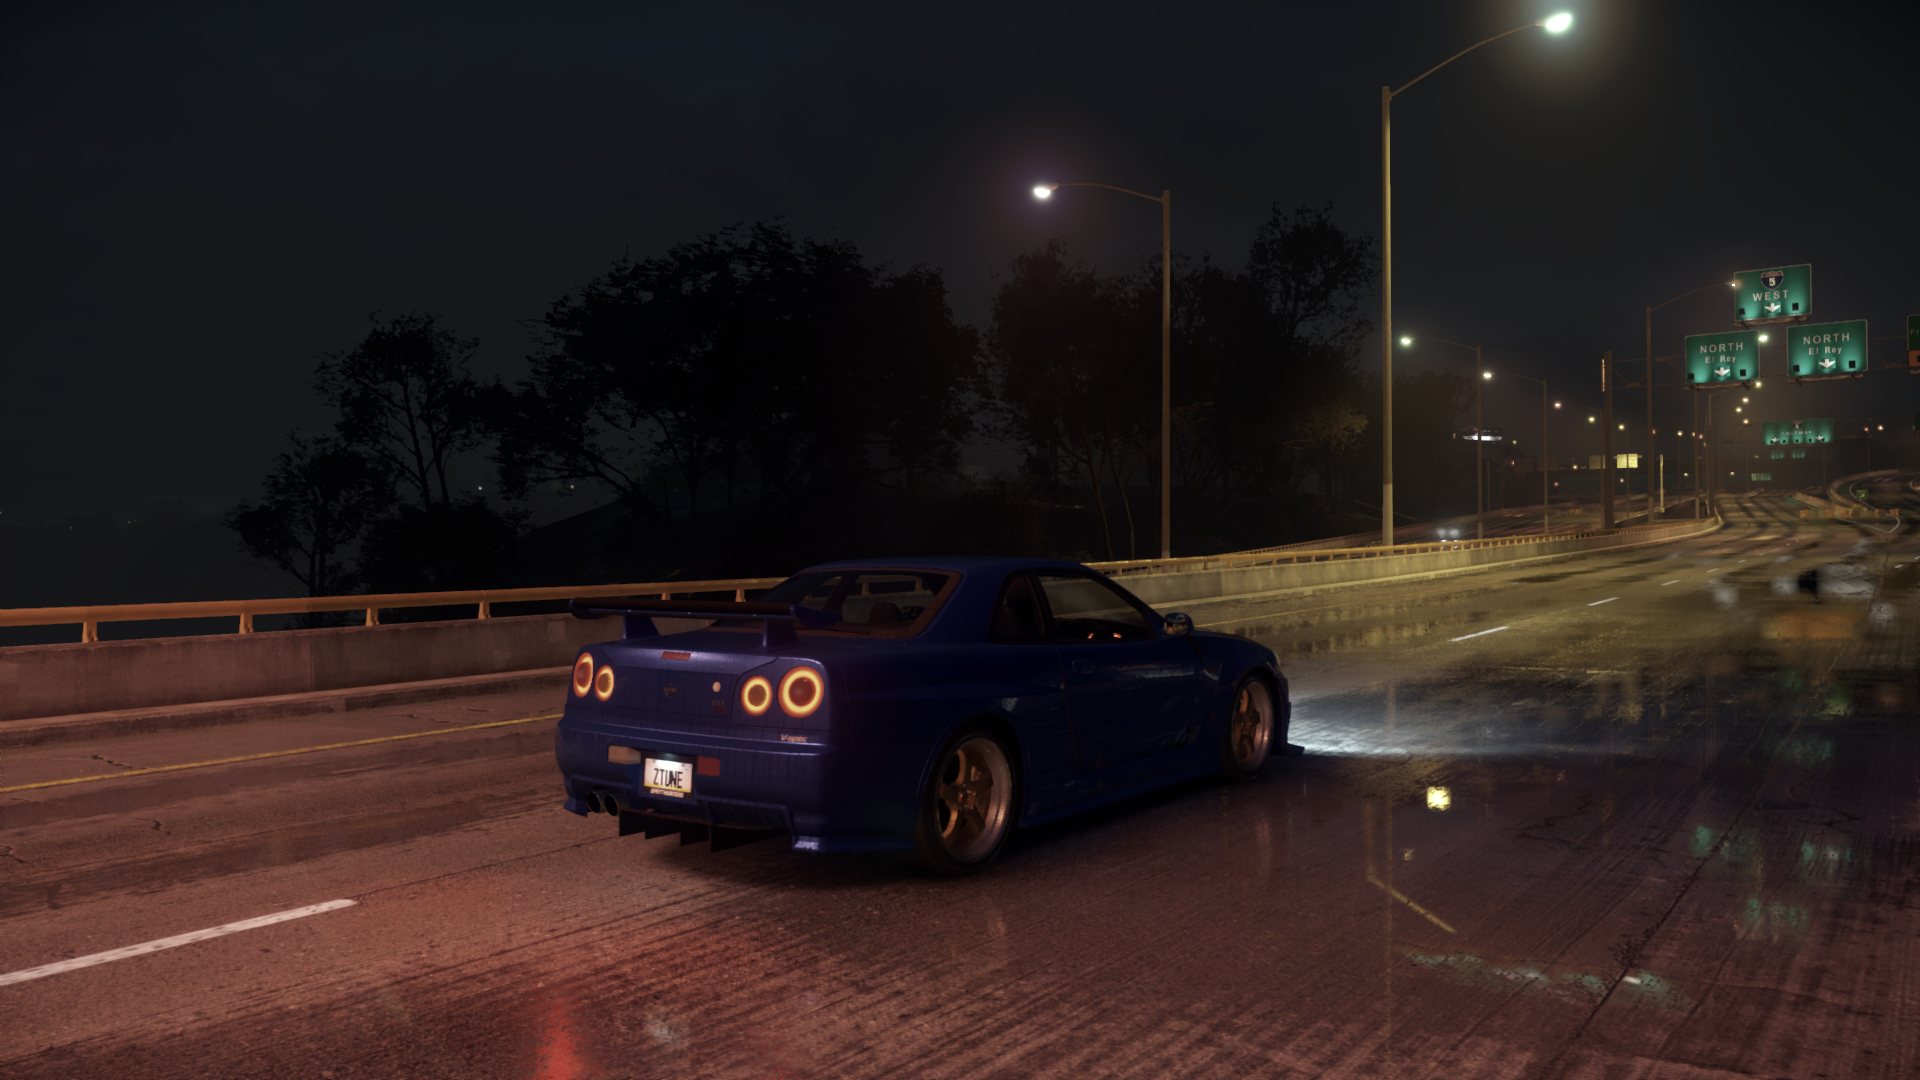 Need For Speed 2015 Need For Speed 2002 Nissan Skyline GT R V SPEC Ii Car Night Screen Shot 1920x1080